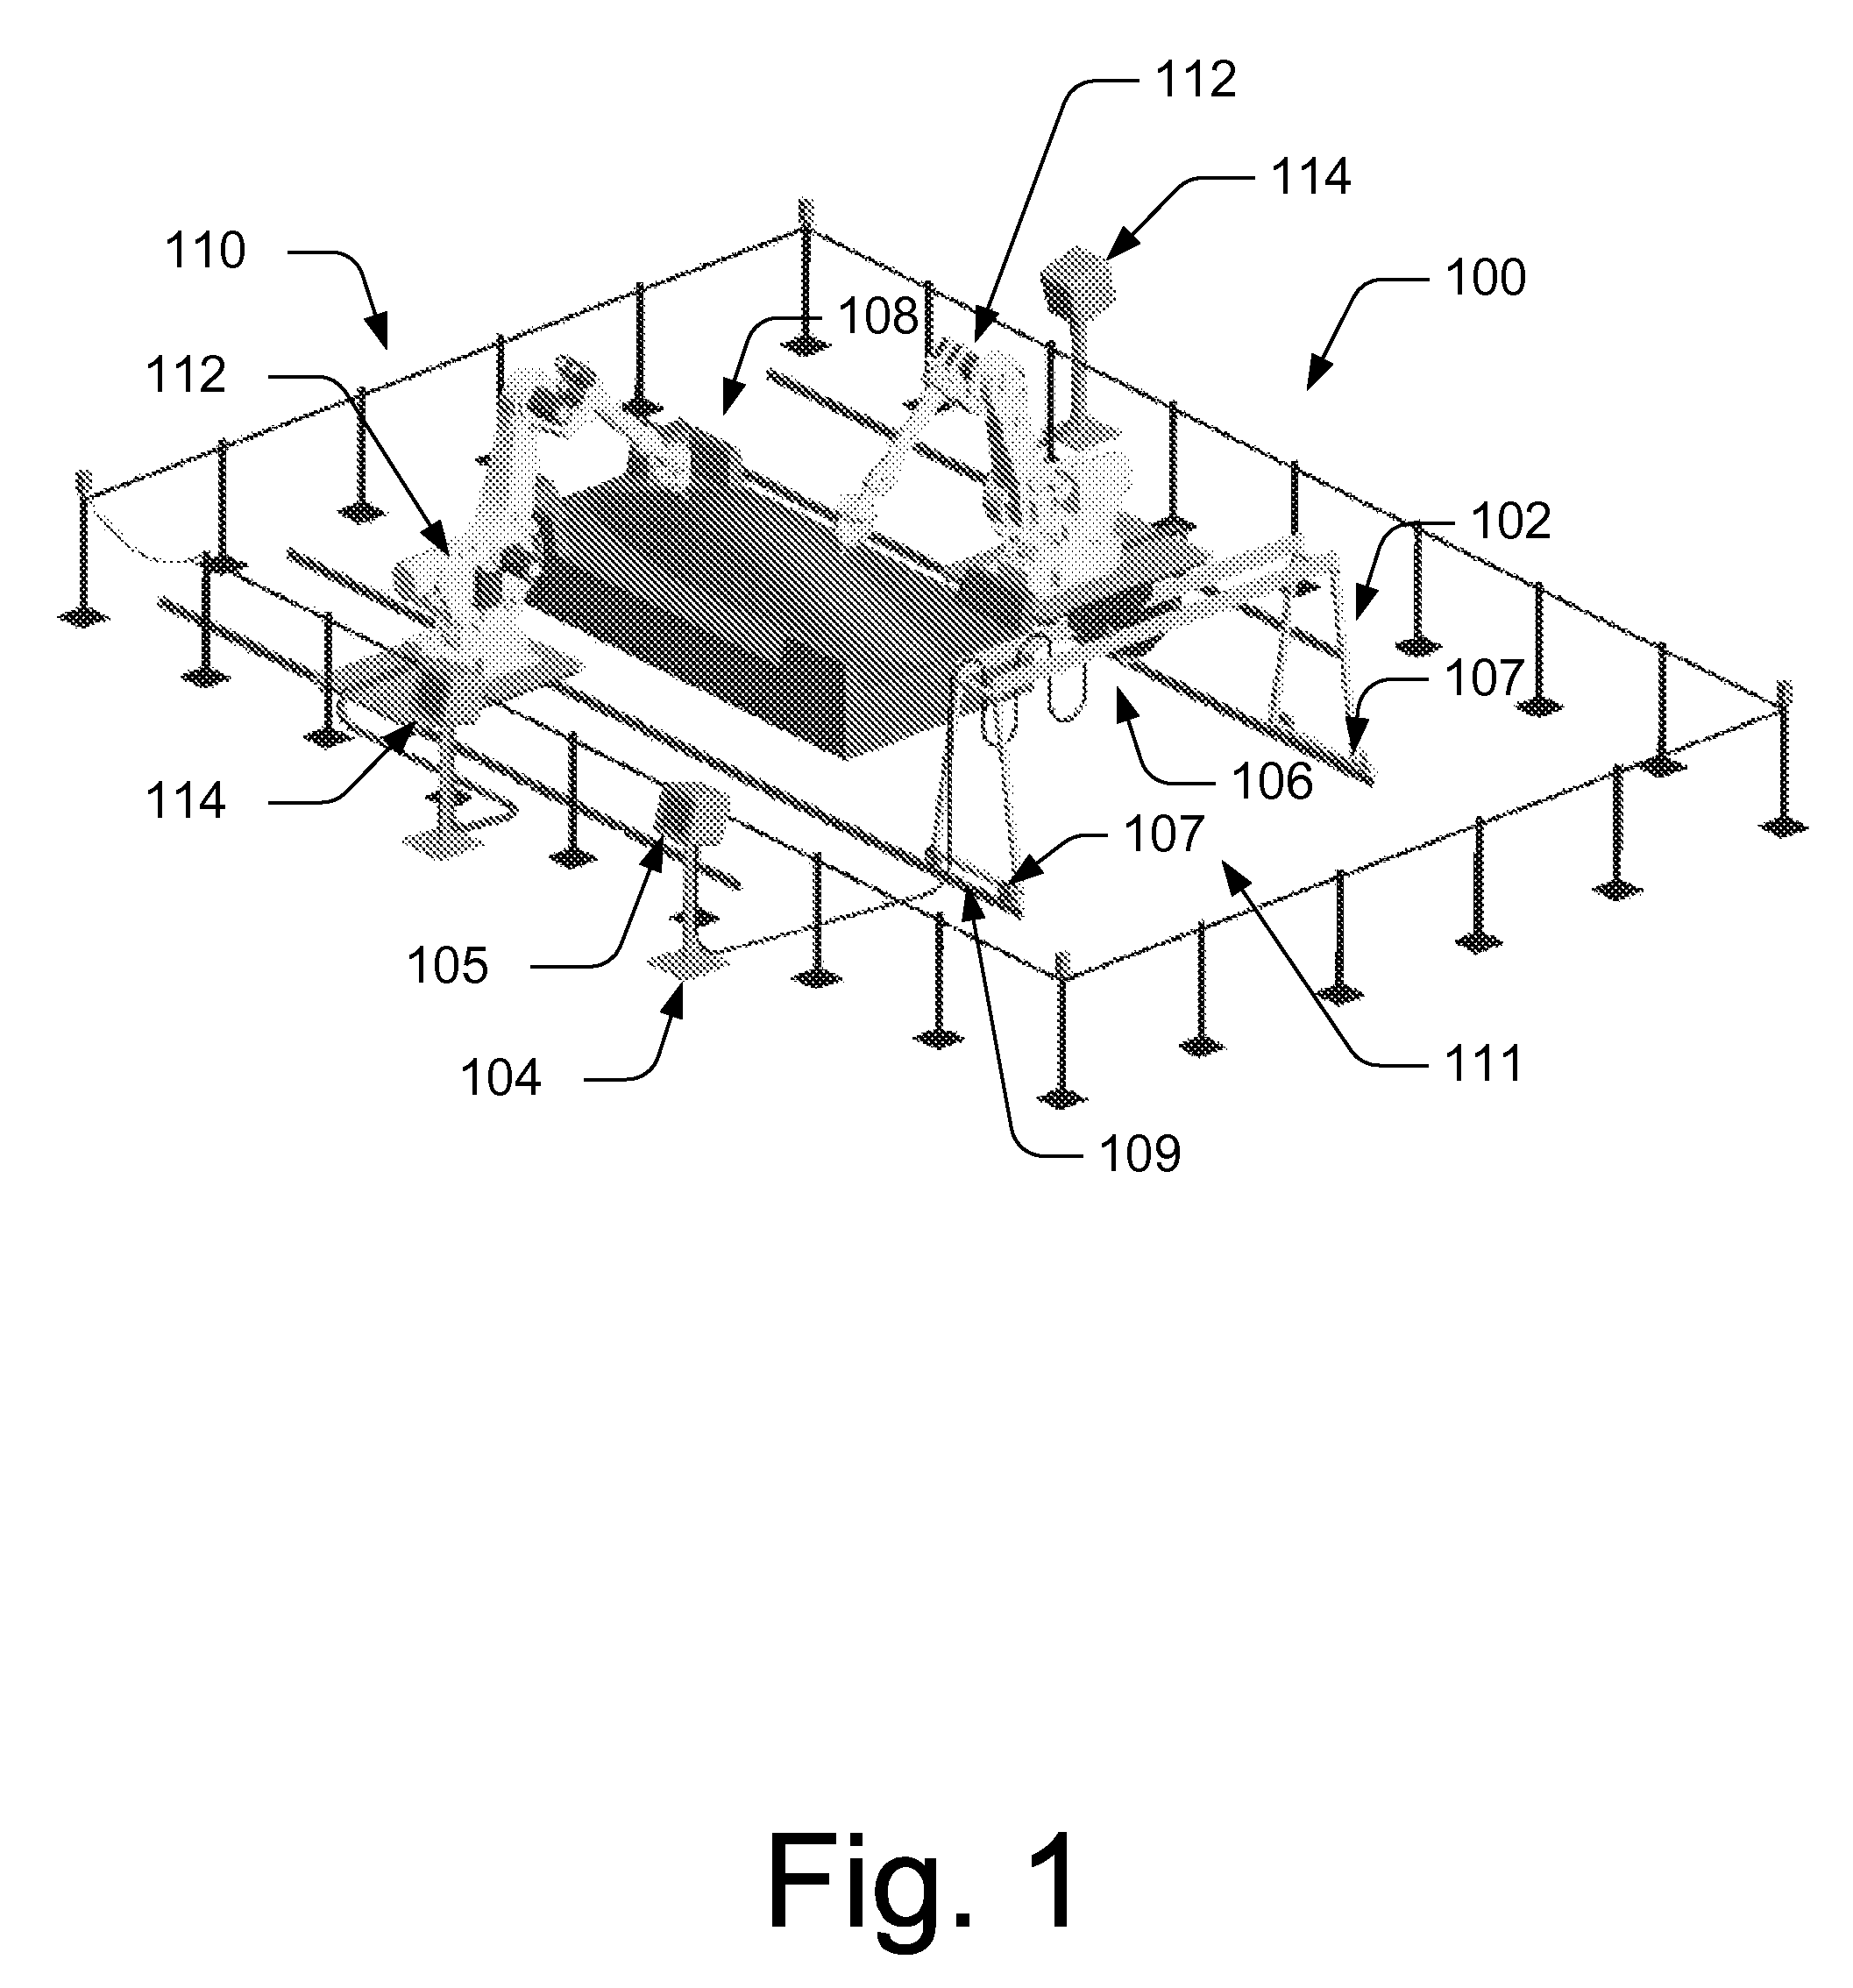 In-process non-contact measuring systems and methods for automated lapping systems